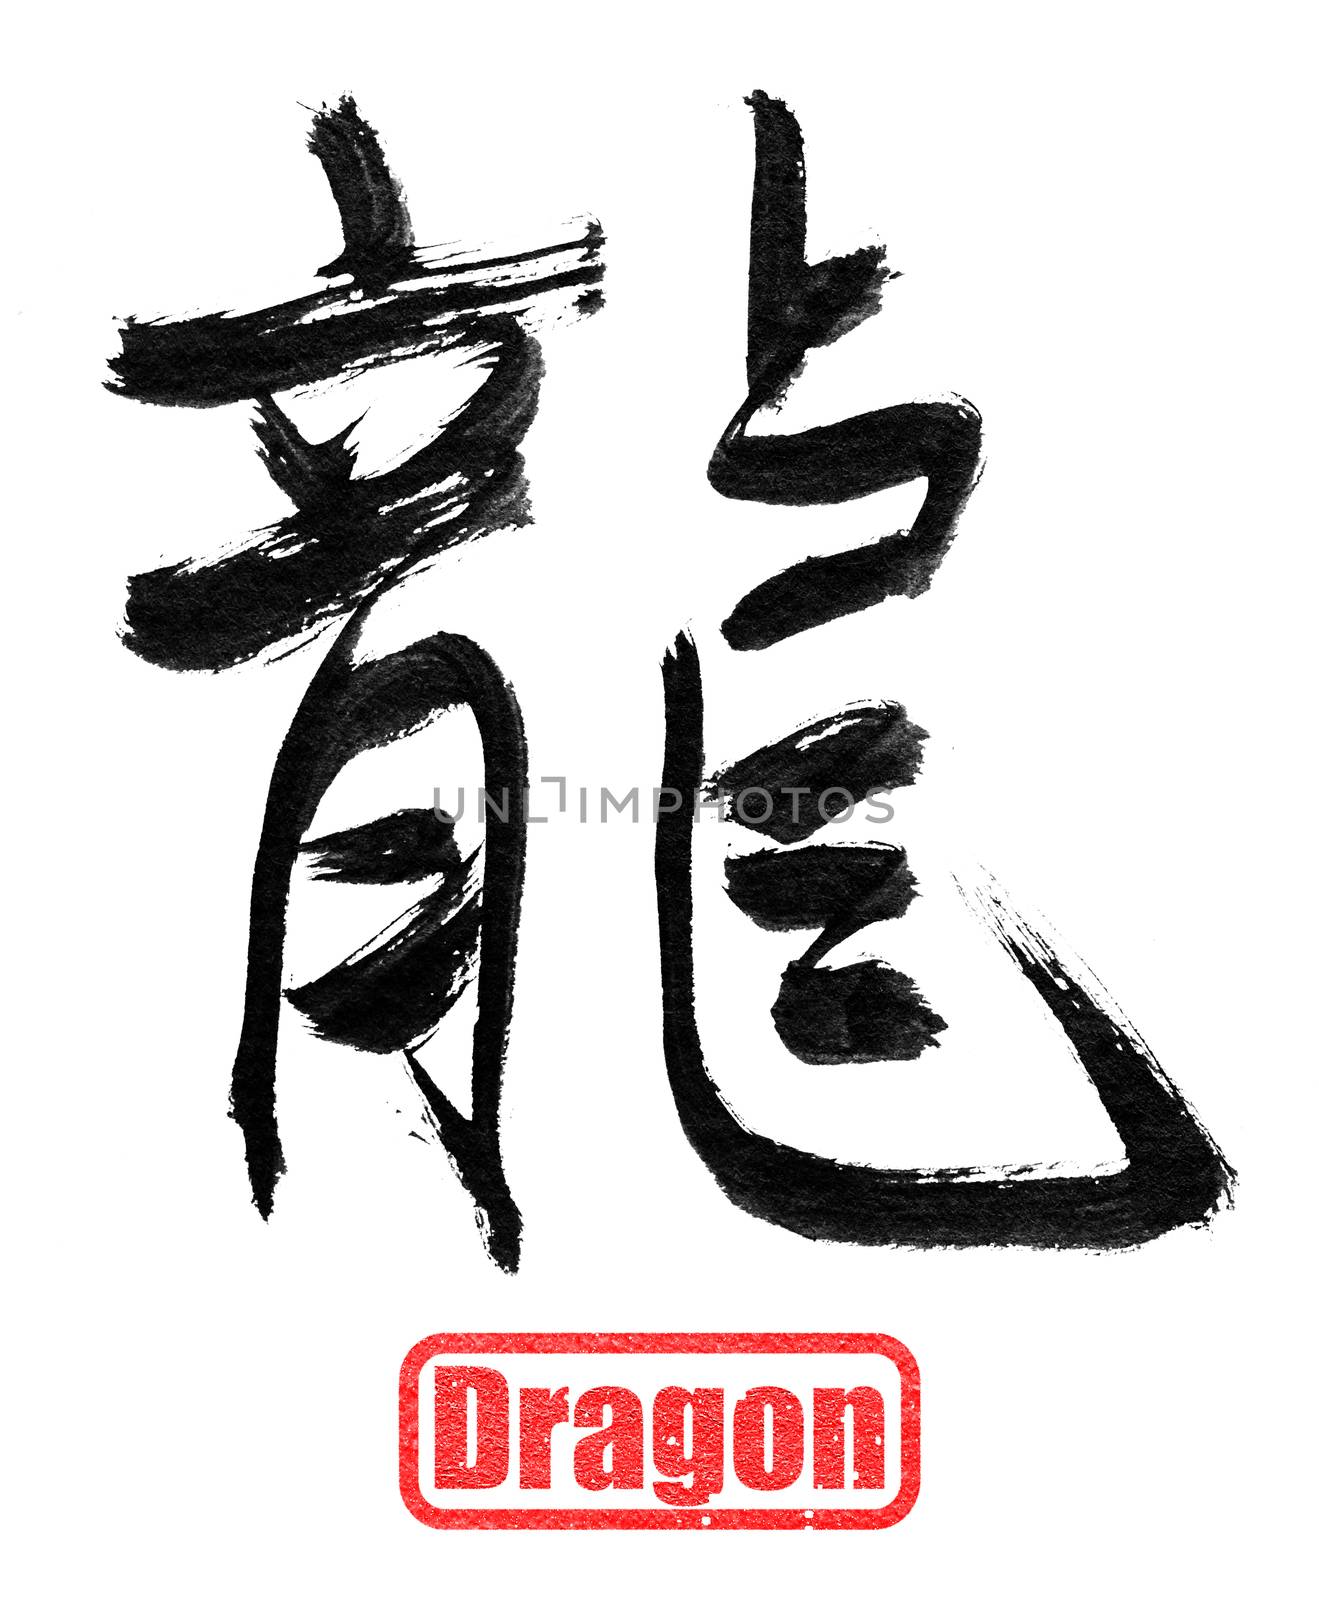 Dragon, traditional chinese calligraphy art isolated on white background.